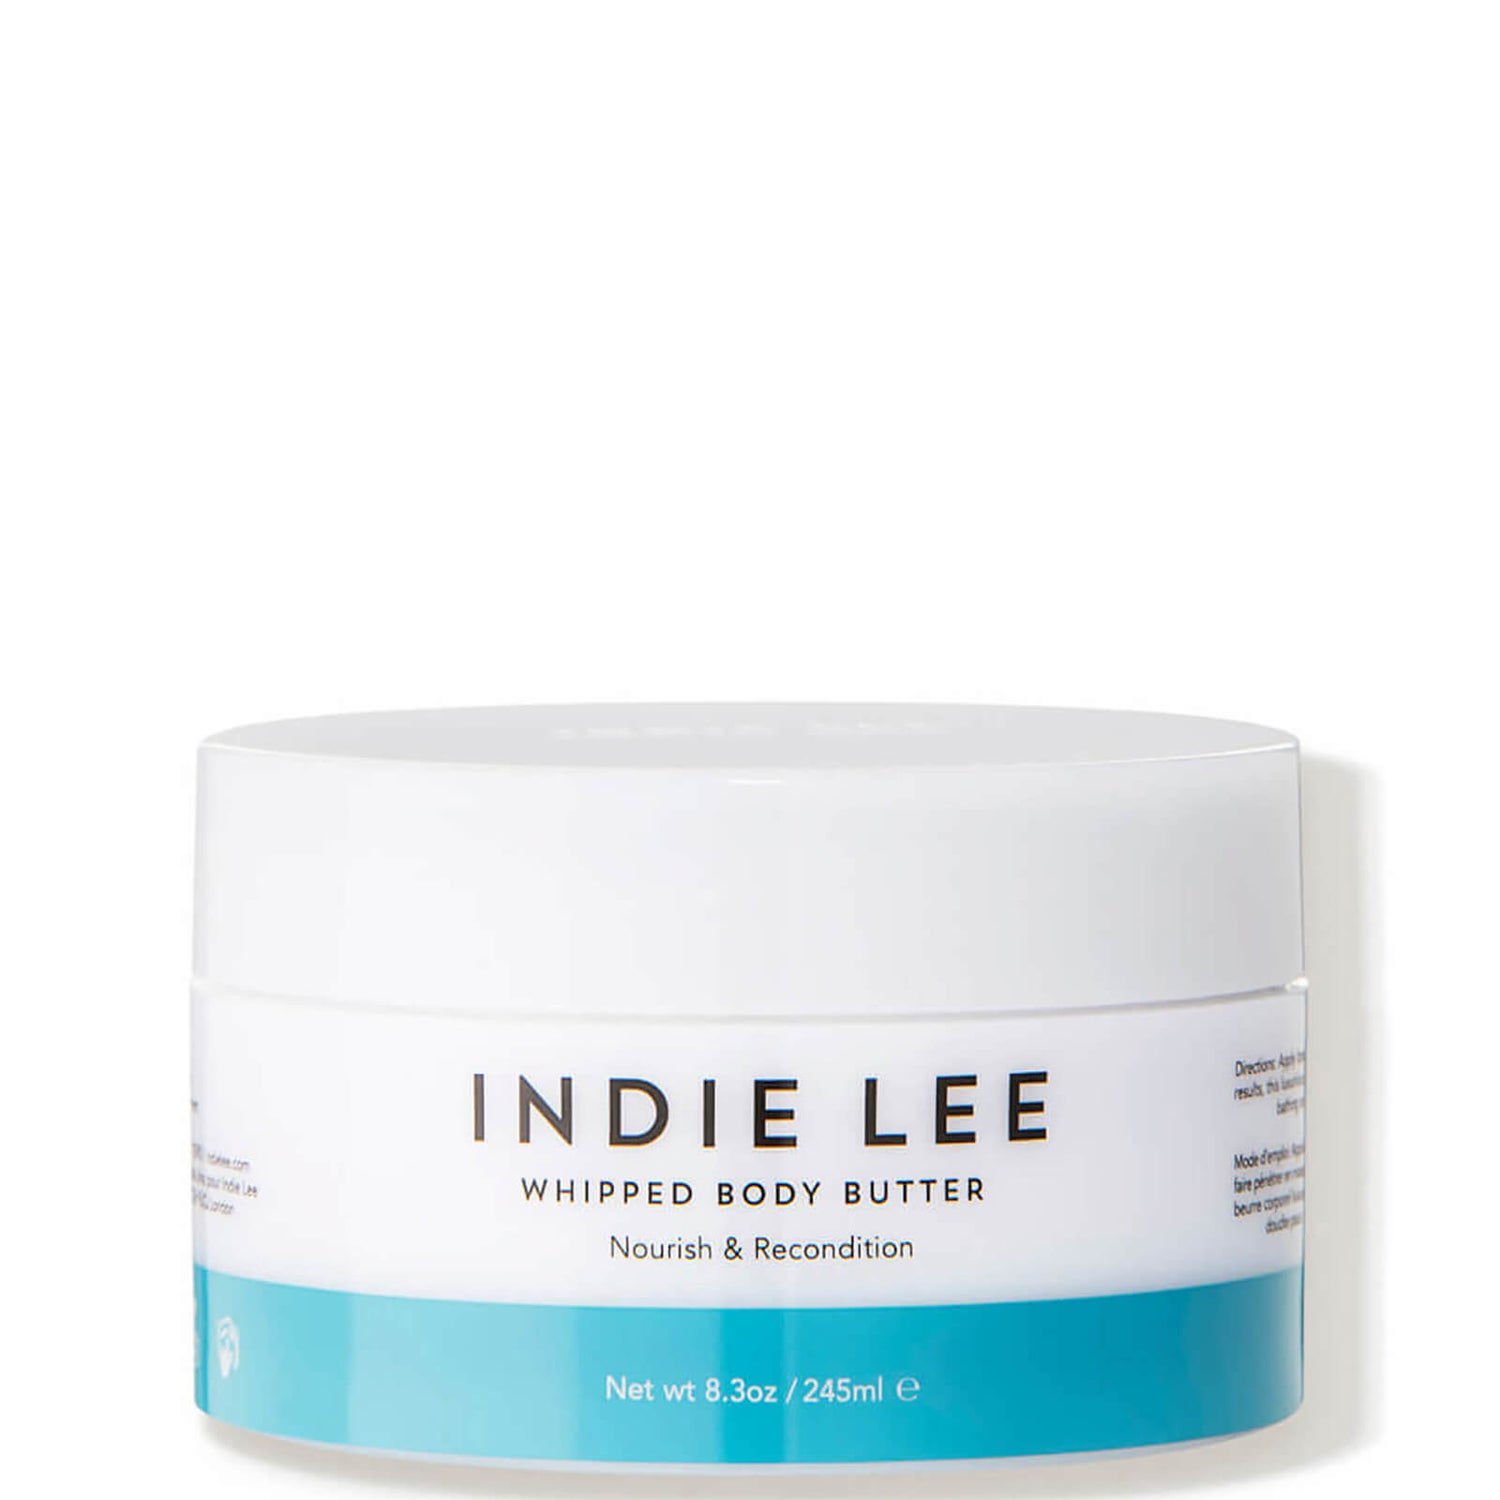 Indie Lee Whipped Body Butter (8.3 oz.)